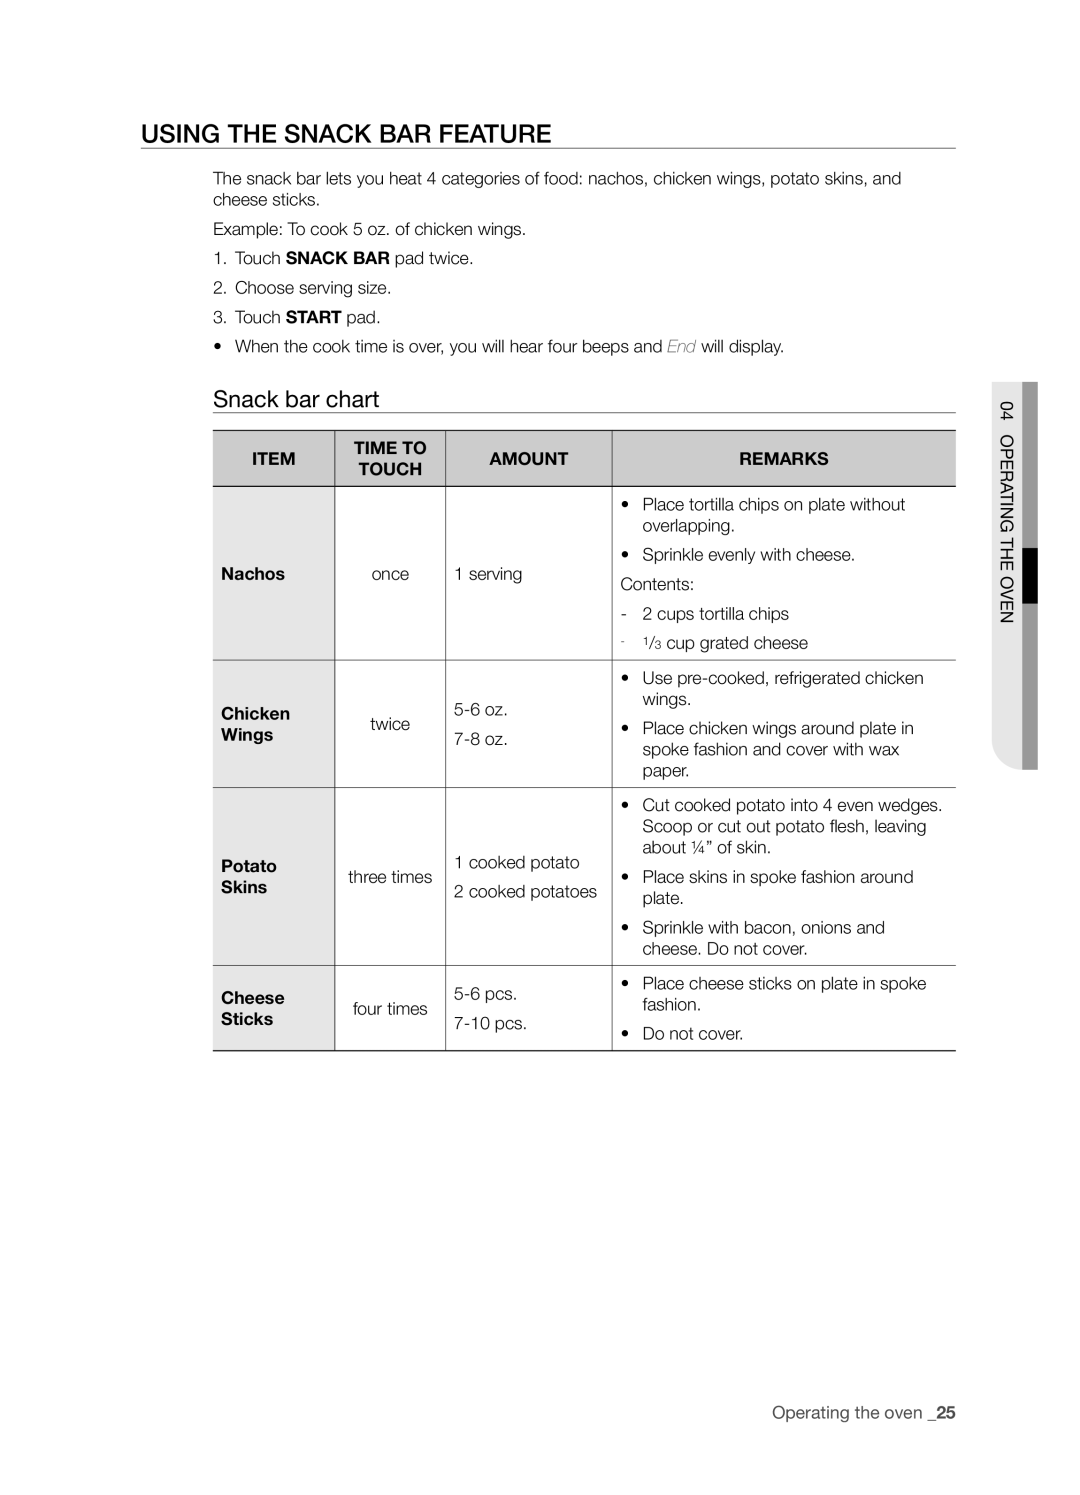 Samsung SMH6165 user manual Using the snack bar feature, Snack bar chart, Operating the oven 